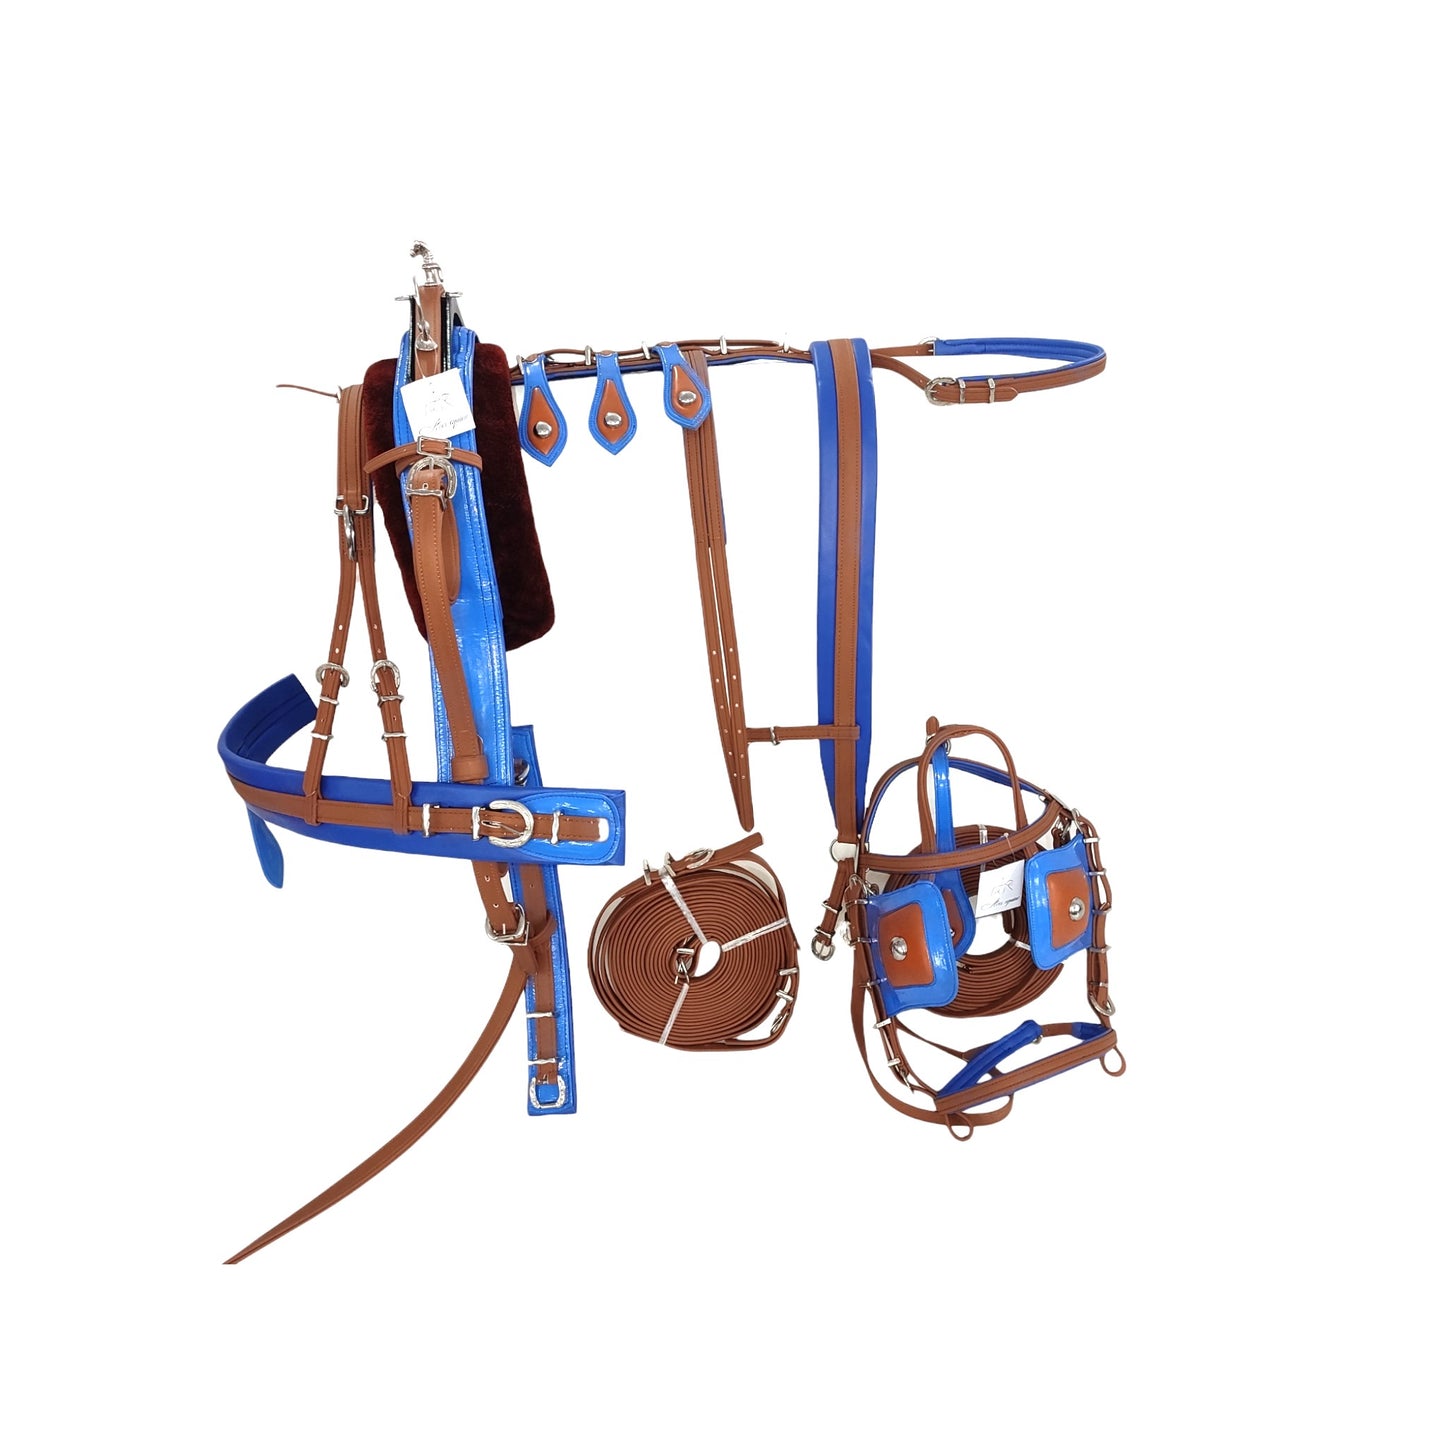 Tiedown Harness with Breaching Tan and Blue colour size Full Cob Pony Small pony Shetland